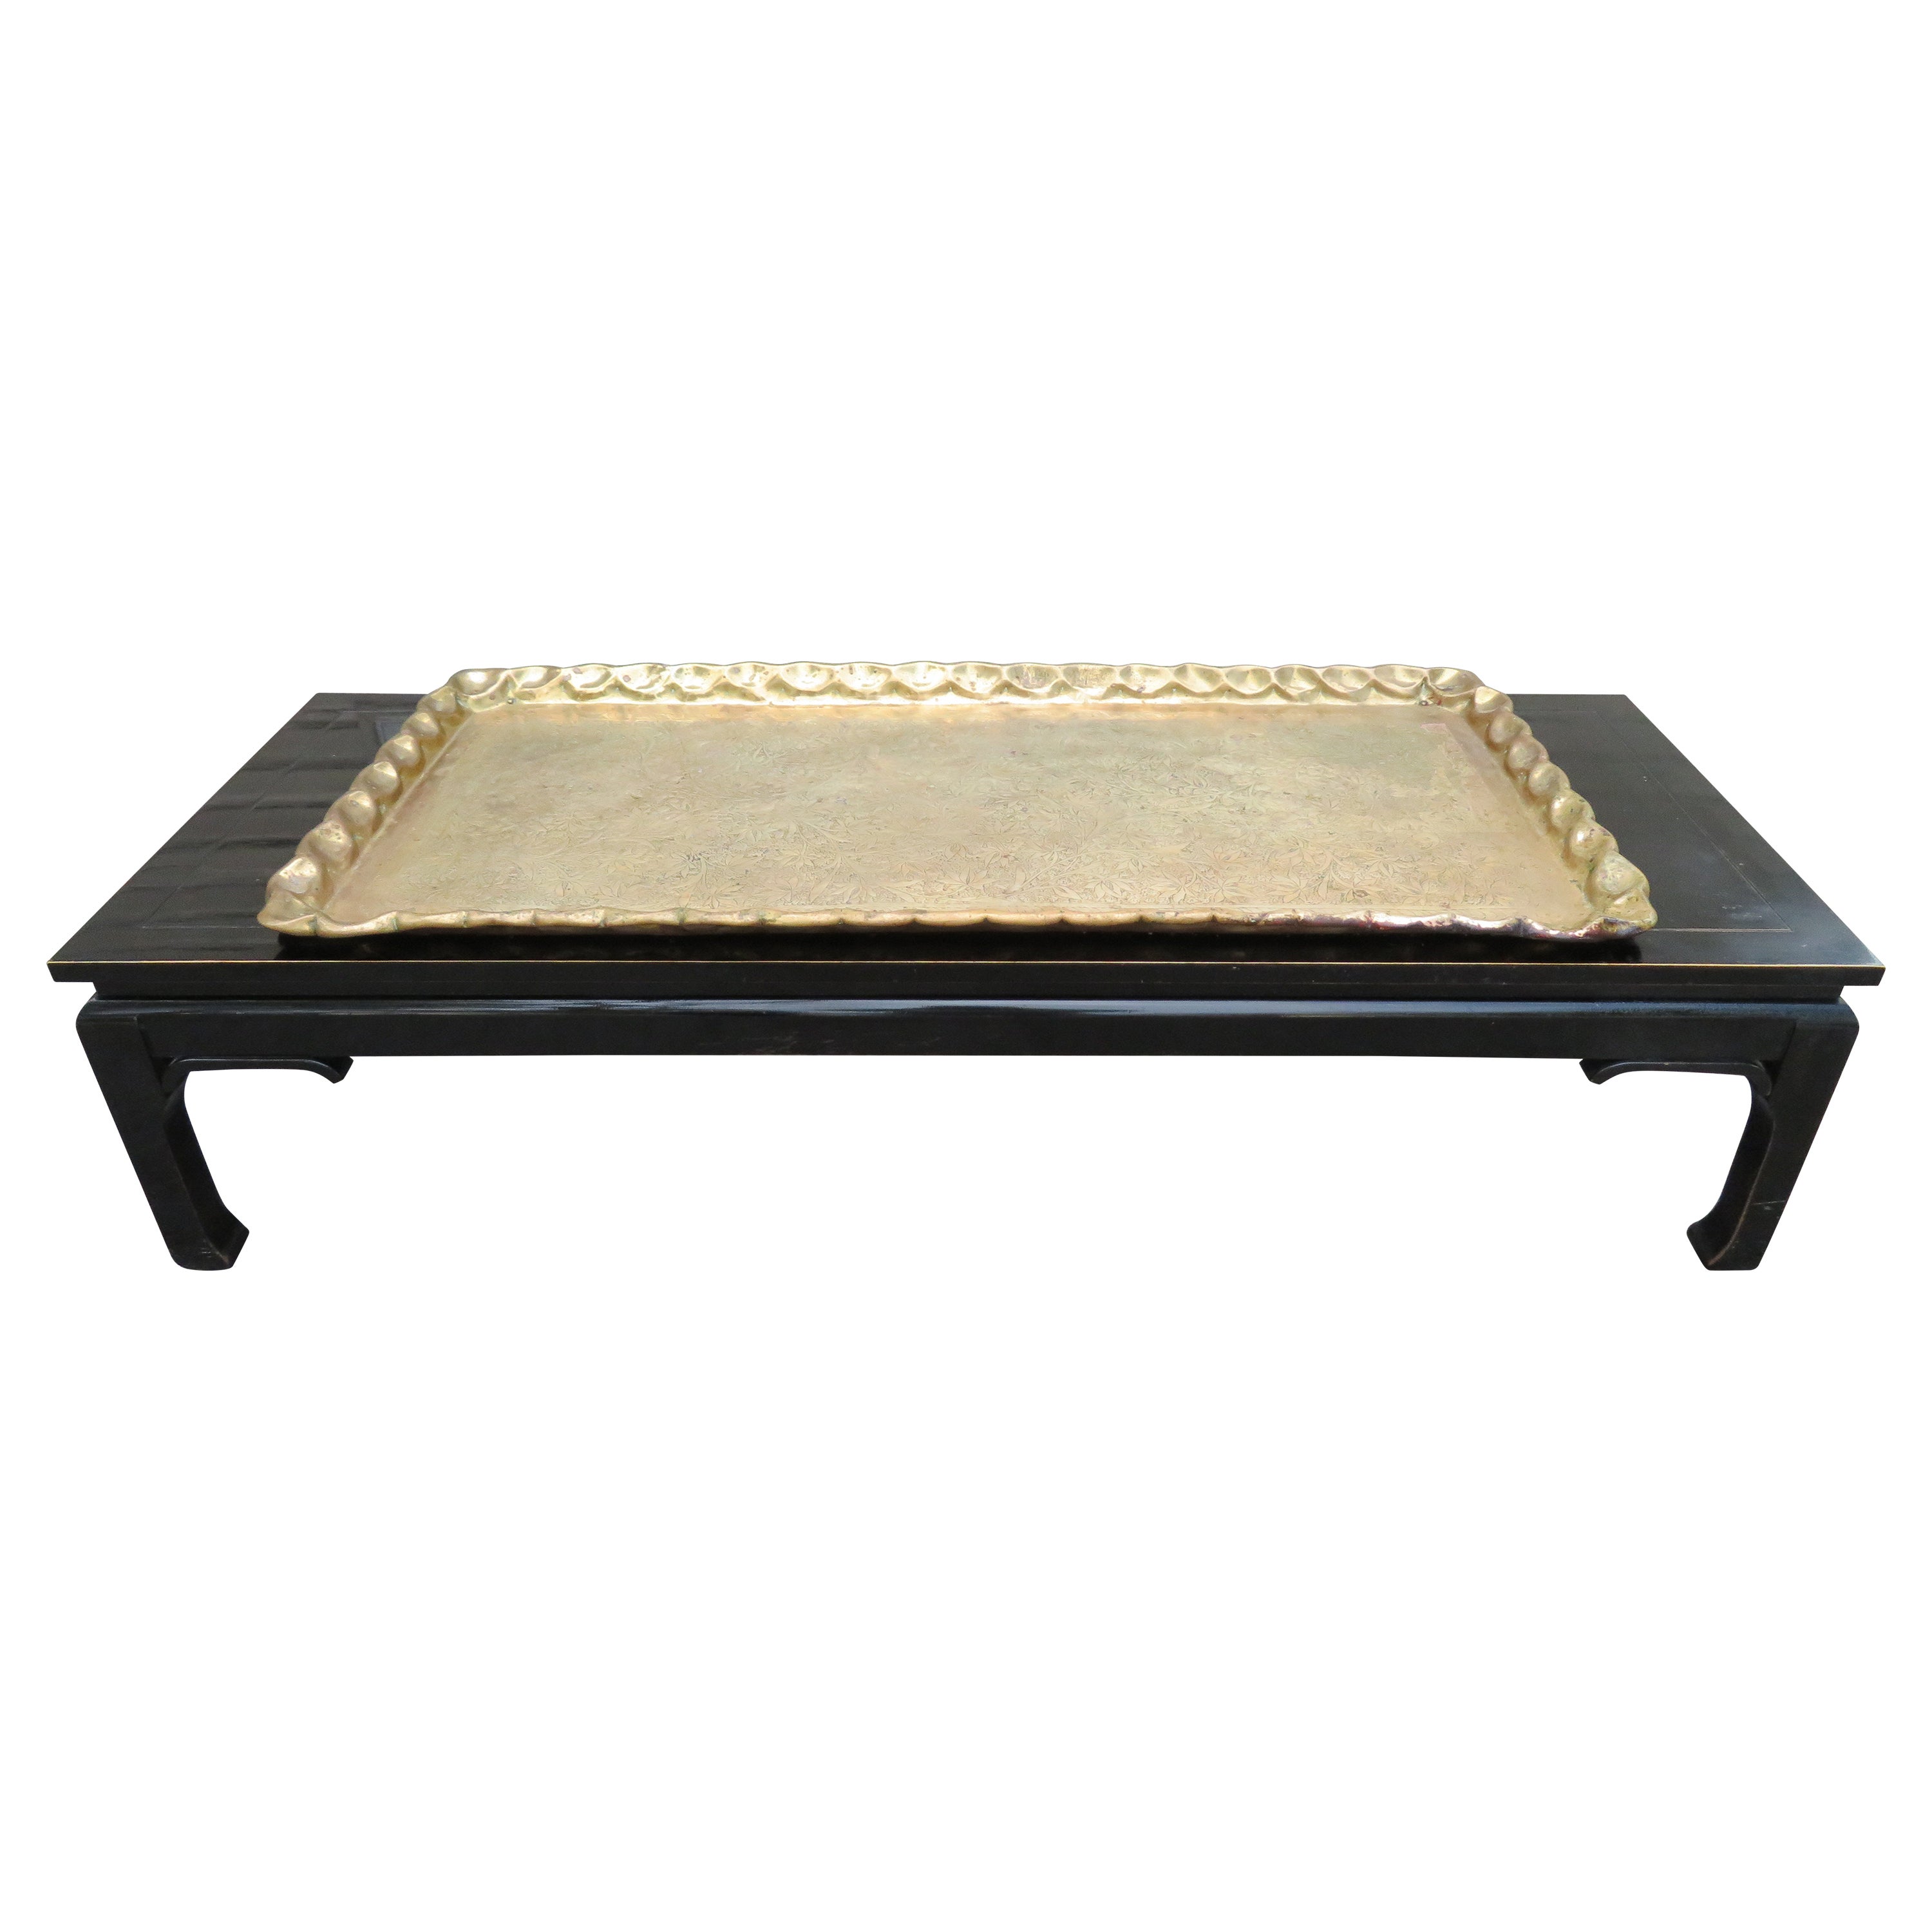 Boho Chic Asian Style Rectangular Coffee Table Attached Brass Tray Chinoiserie